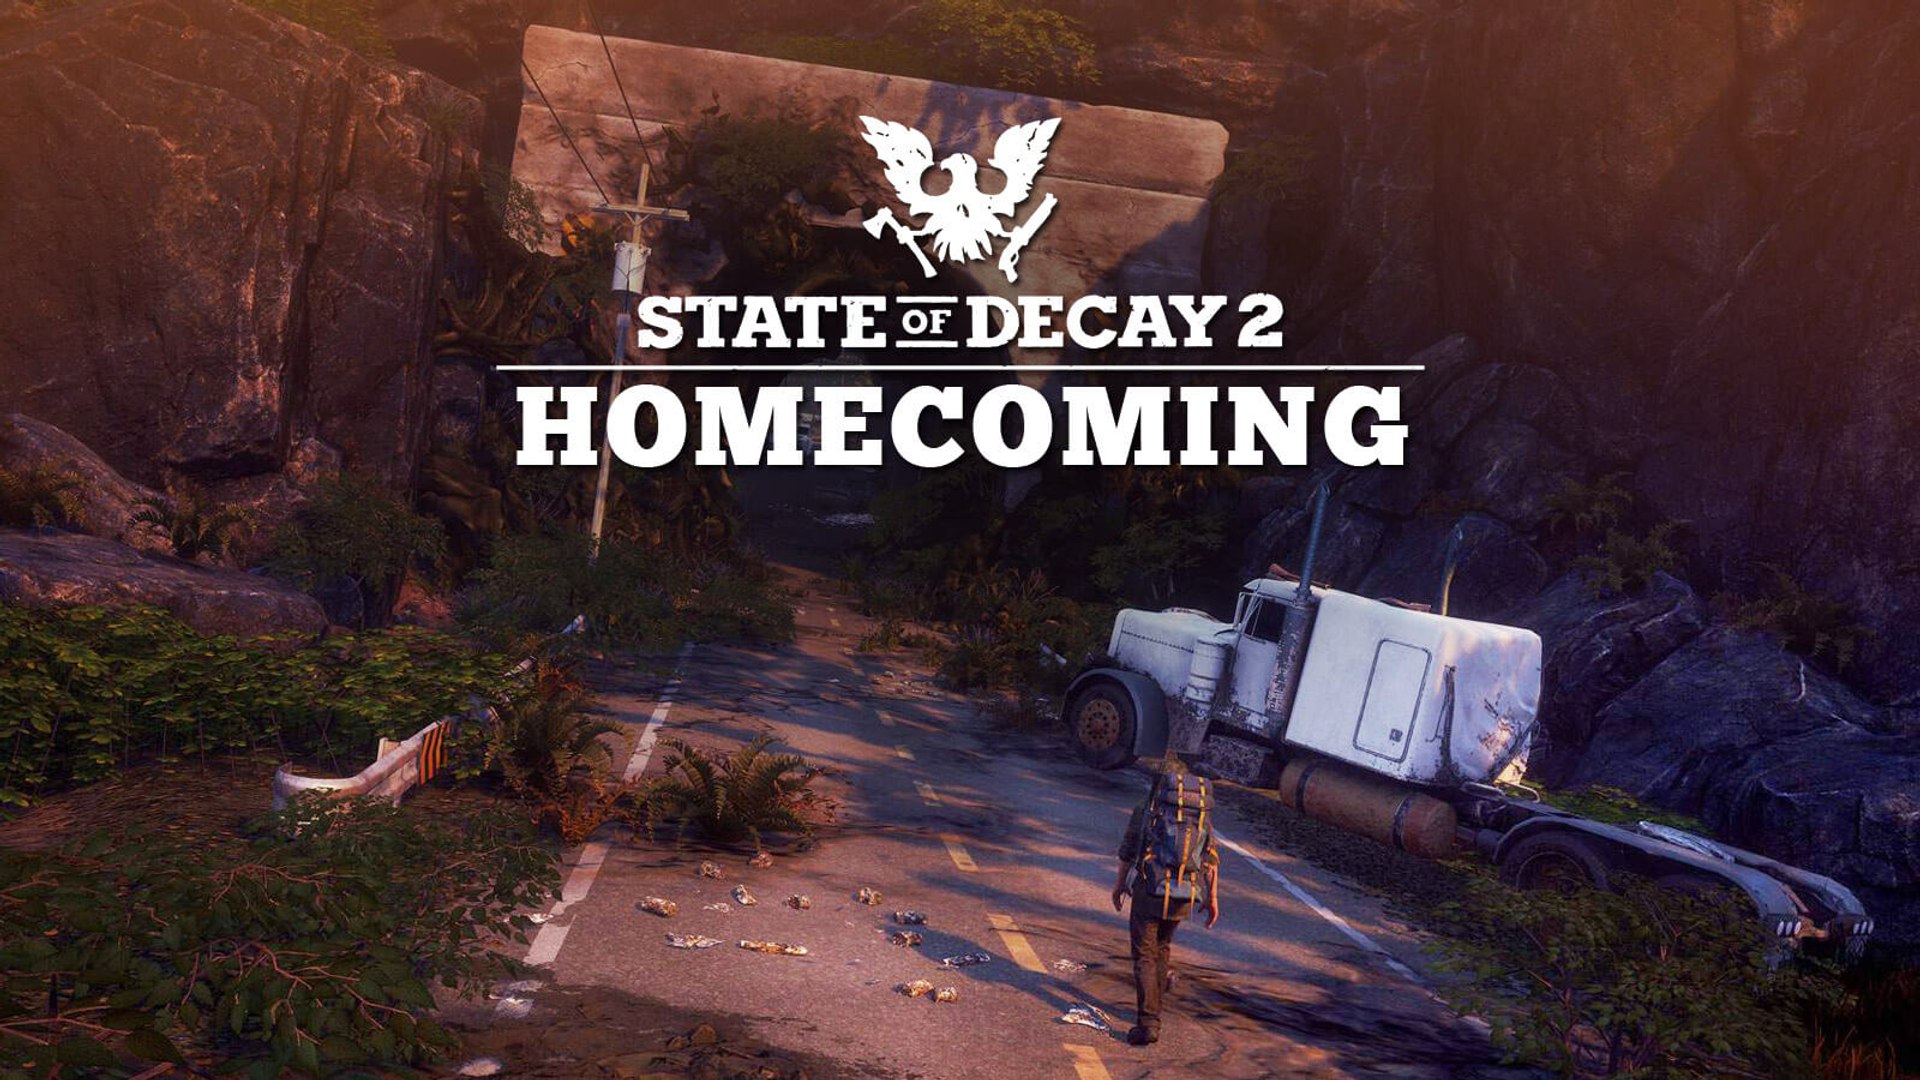 State of Decay 2 - Homecoming Story Update Trailer